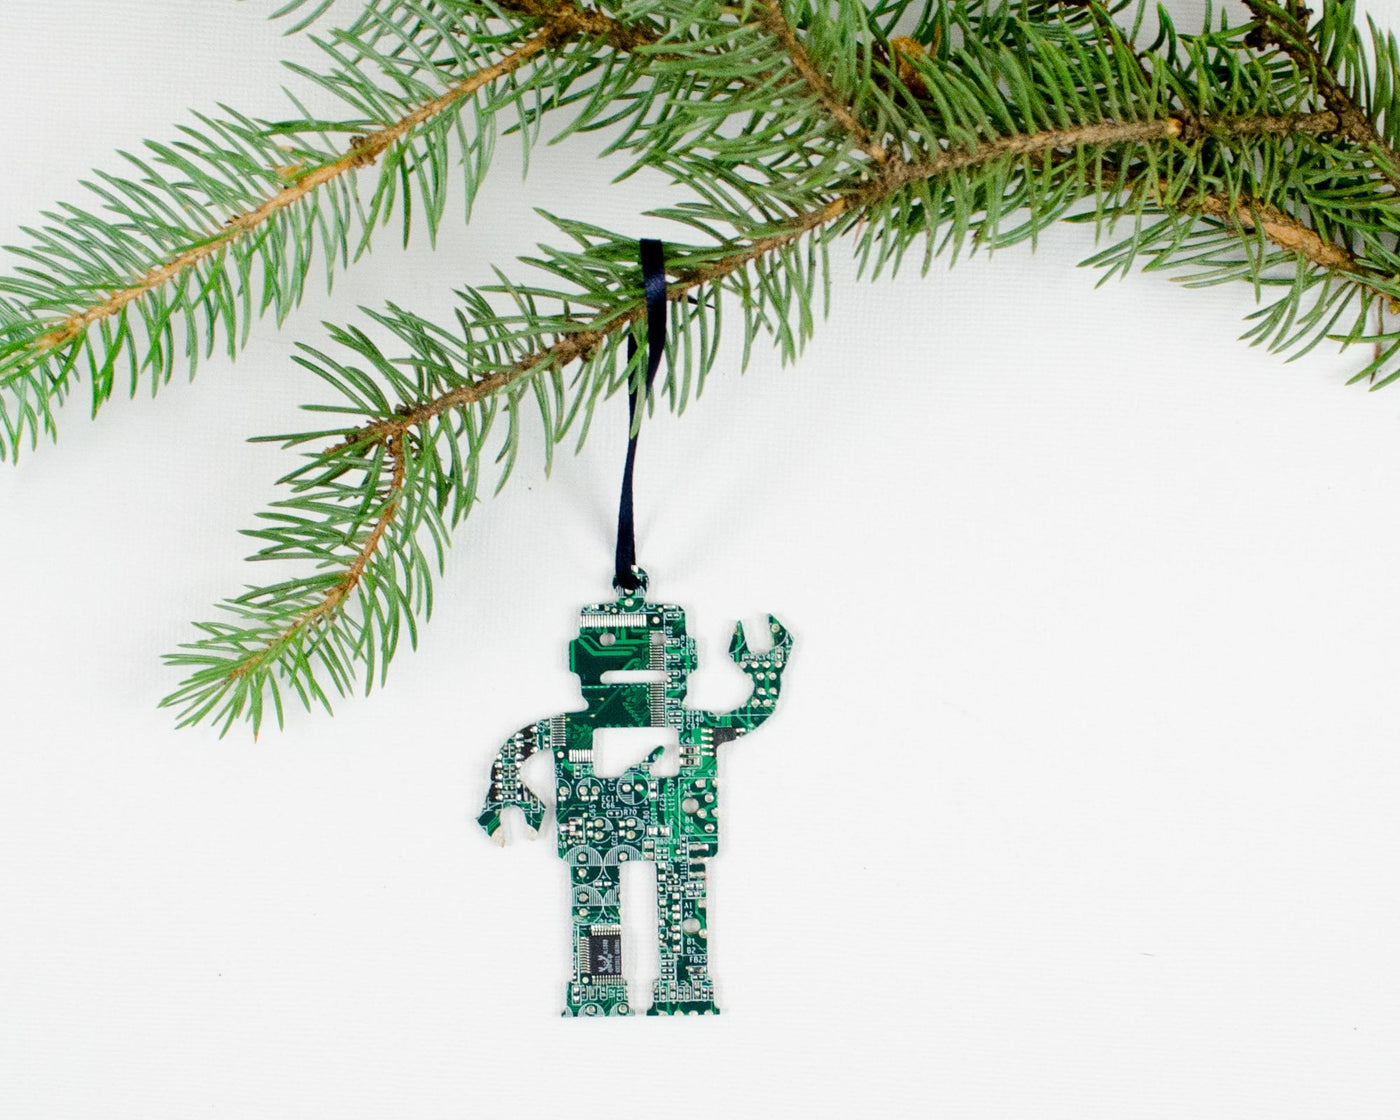 Circuit Board Robot Ornament, Computer Programmer, Software Engineer, Computer Science Gift, Christmas Ornament, Techie Stocking Stuffer